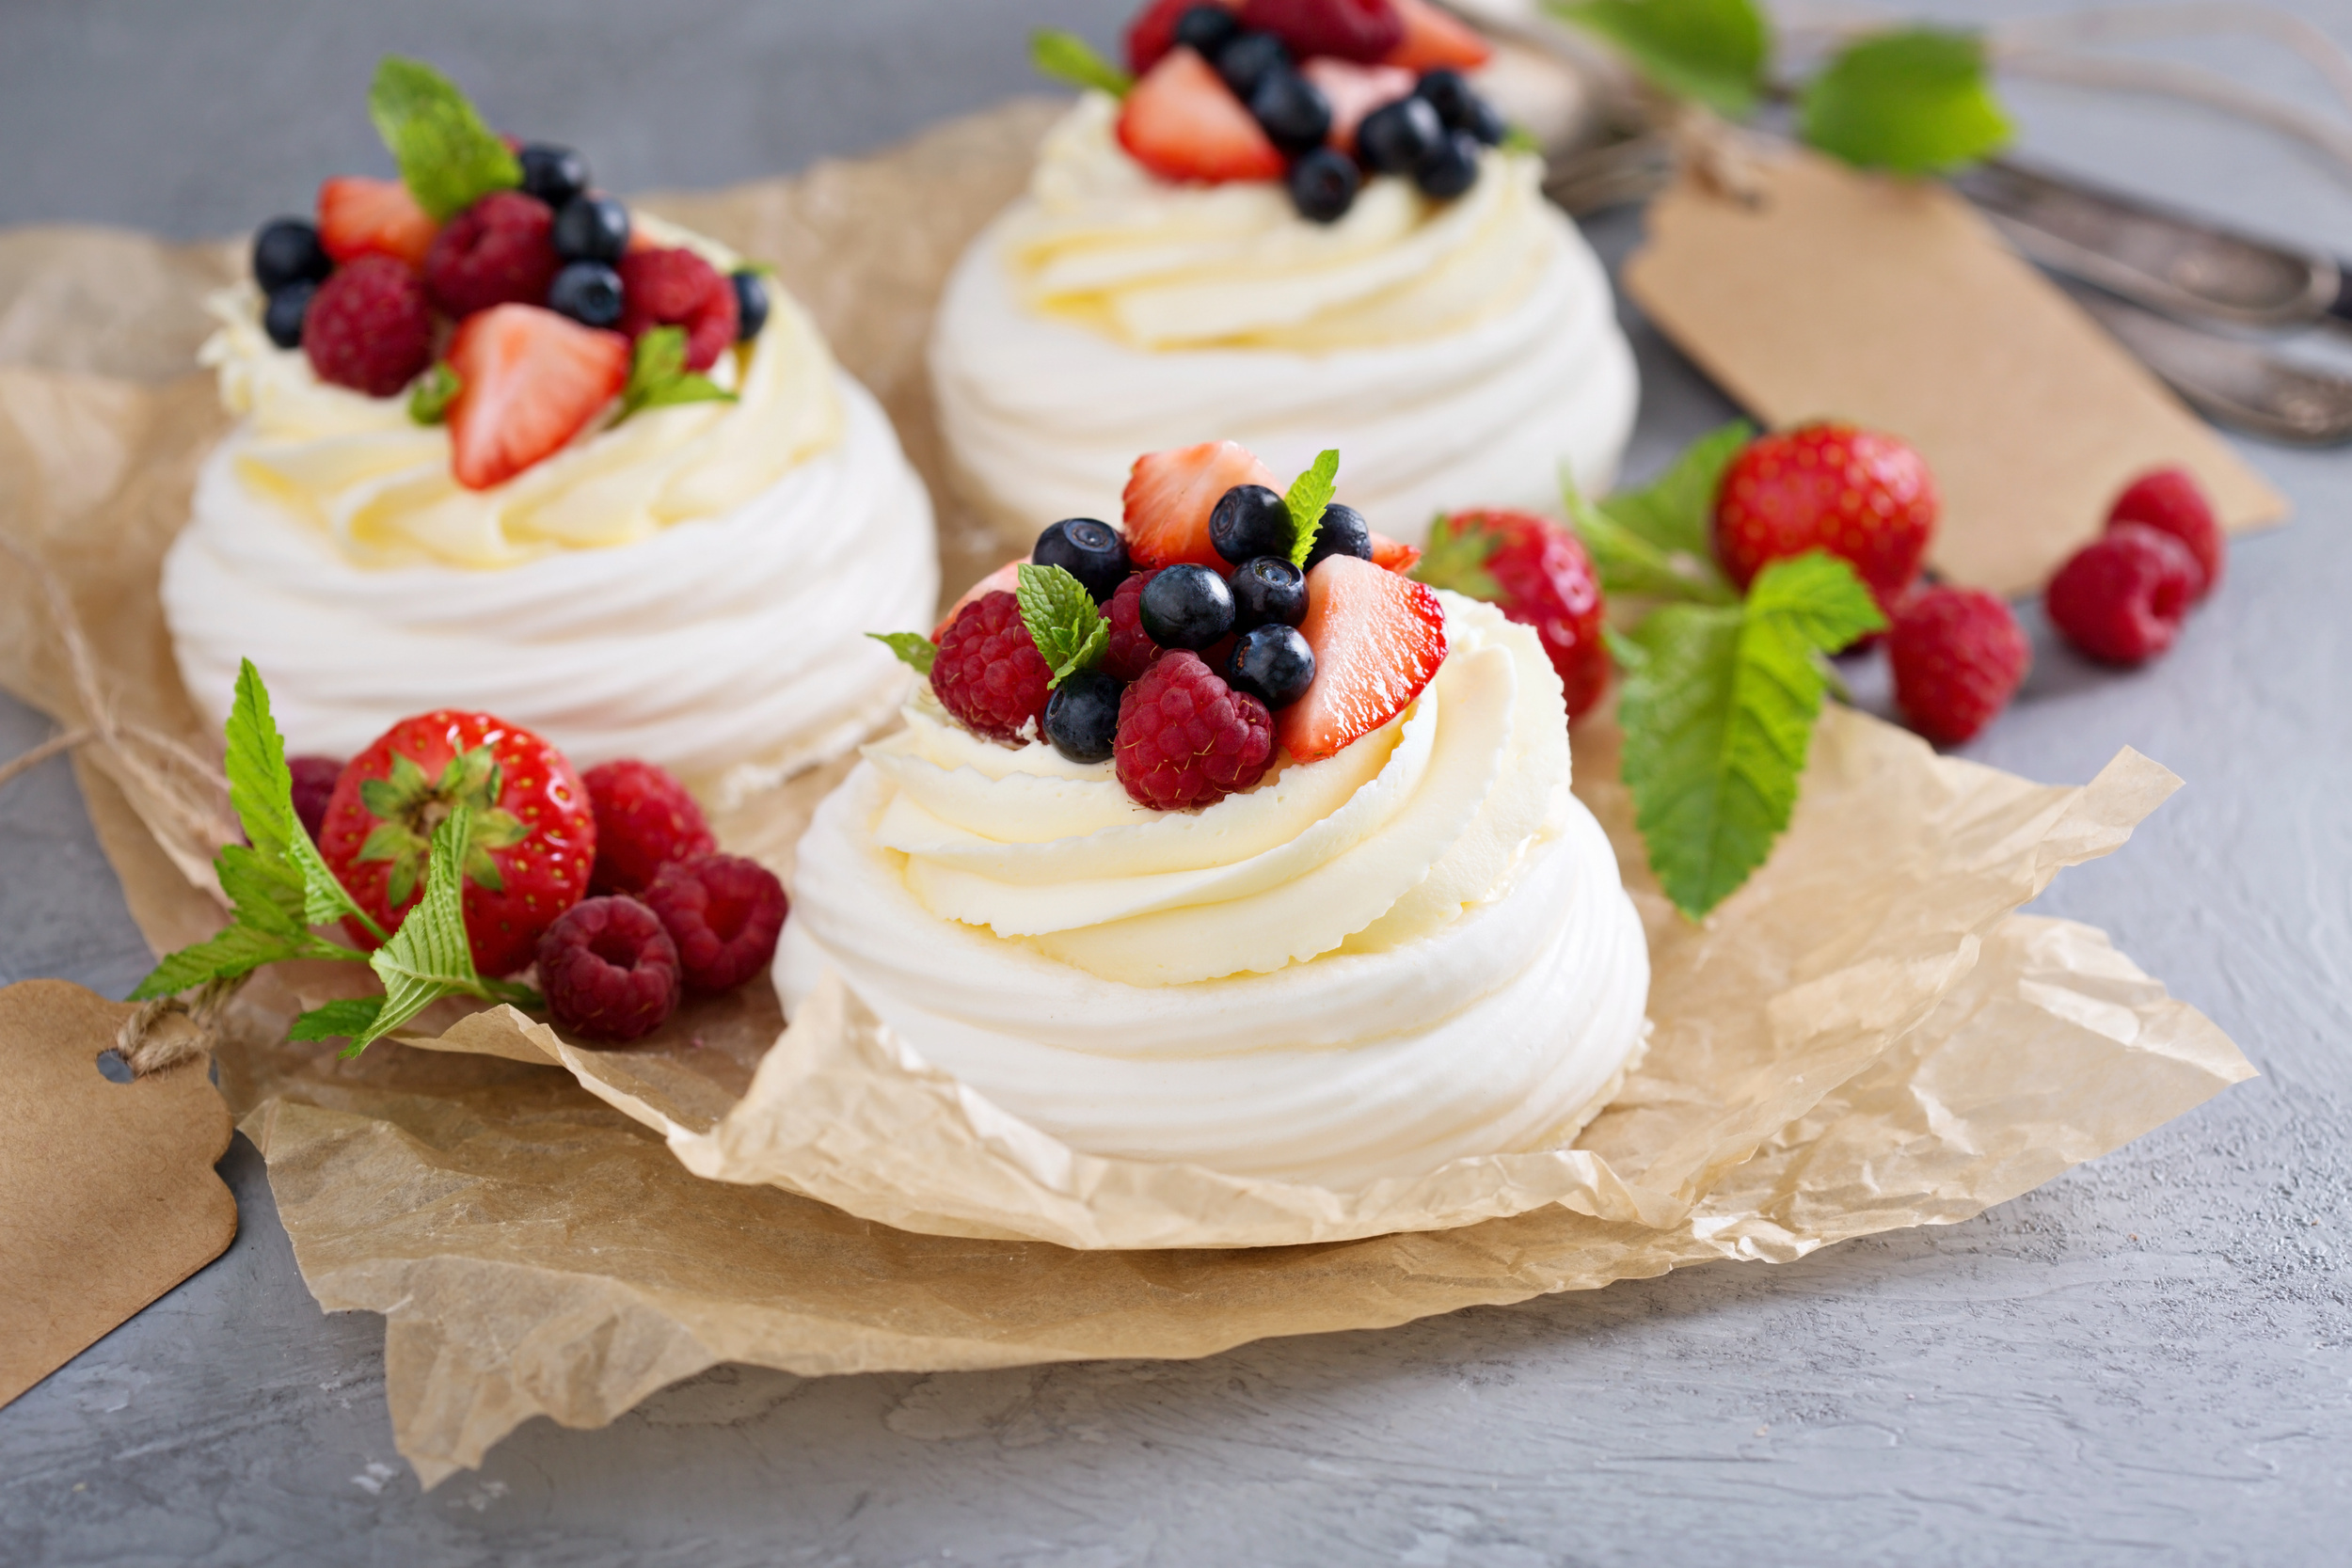 <p>Meringue fans will go mad for this one. In Australia and New Zealand, there’s a traditional dessert that’s made up of meringue topped with whipped cream topped with fruit. <a href="https://natashaskitchen.com/pavlova-recipe/"><span>As Natasha’s Kitchen will tell you in this recipe</span></a>, the meringue is the best part, as it’s crisp on the outside yet soft and fluffy on the inside.</p><p><a href='https://www.msn.com/en-us/community/channel/vid-cj9pqbr0vn9in2b6ddcd8sfgpfq6x6utp44fssrv6mc2gtybw0us'>Follow us on MSN to see more of our exclusive lifestyle content.</a></p>